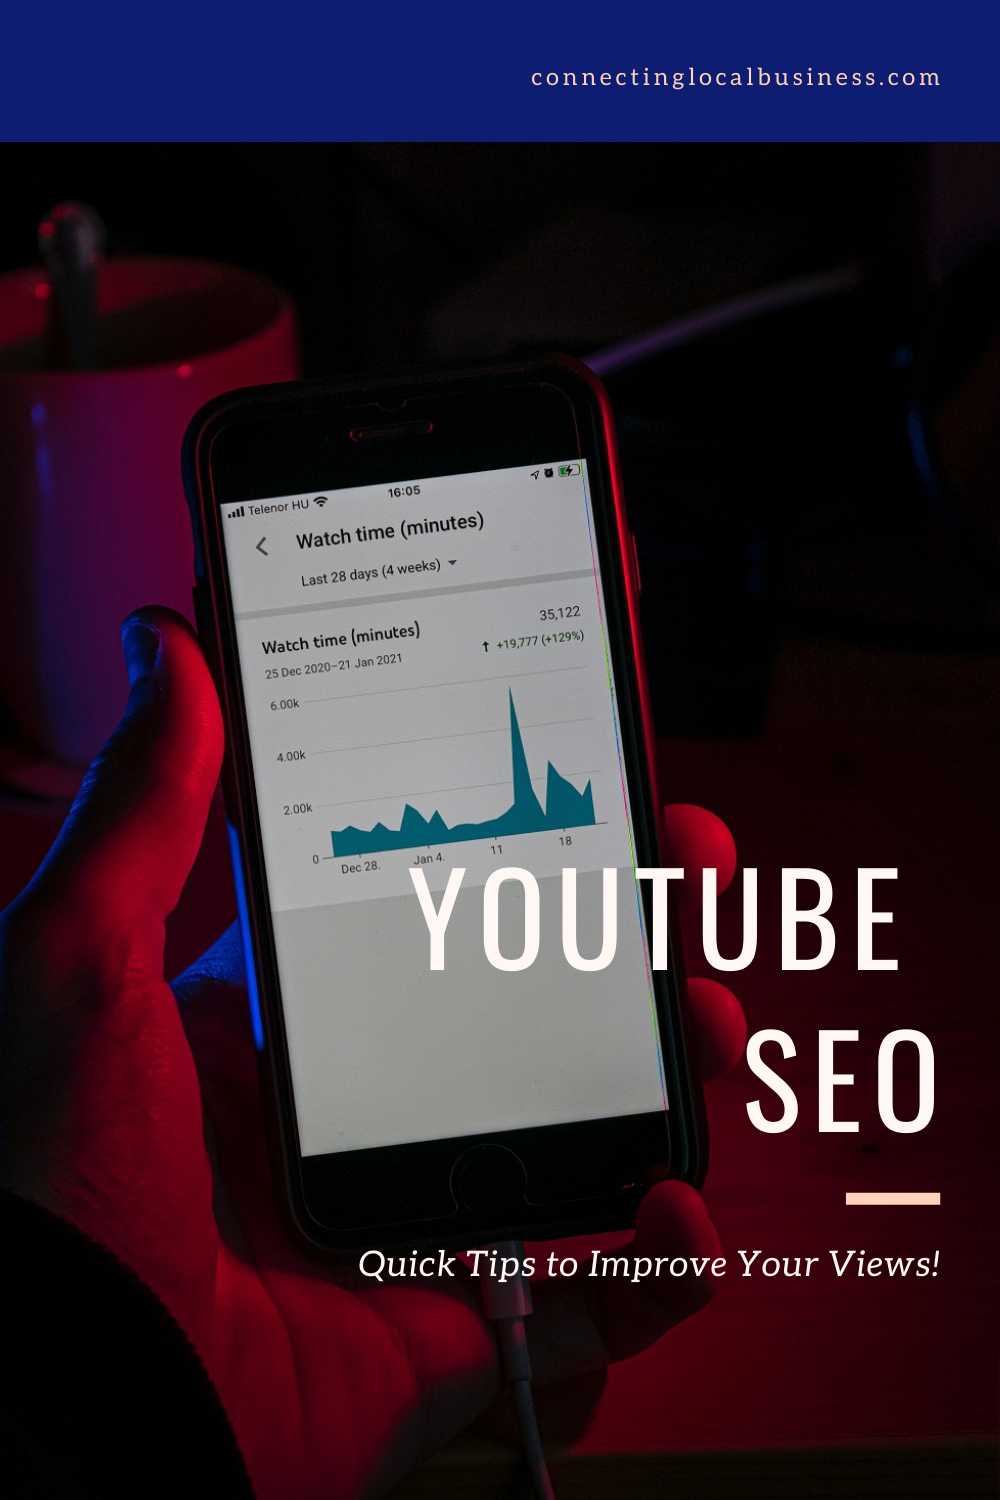 YouTube SEO: Quick Tips to Improve Your Views